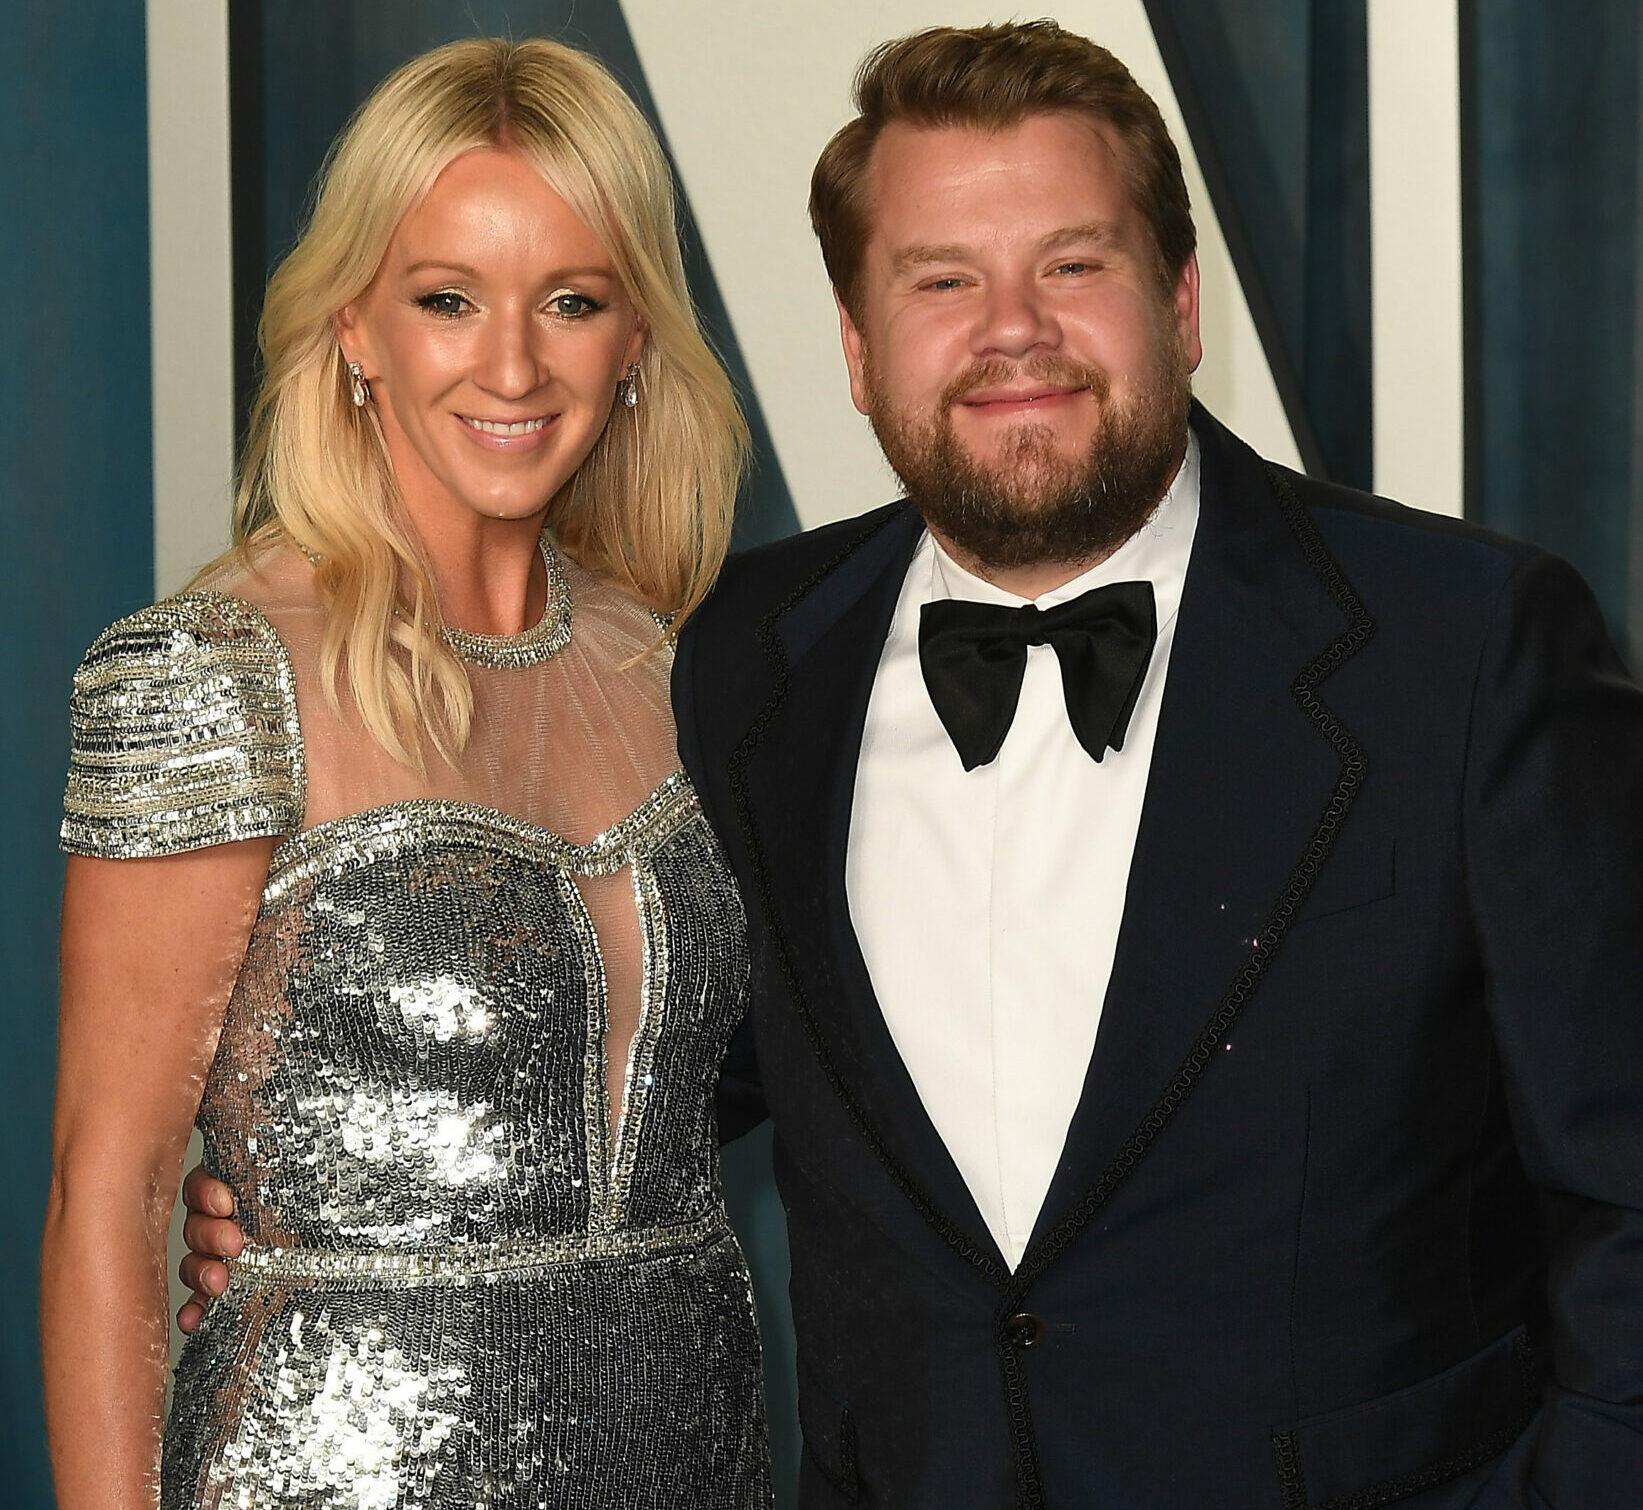 2022 Vanity Fair Oscar Party at the Wallis Annenberg Center for the Performing Arts on March 27, 2022 in Beverly Hills, California. 27 Mar 2022 Pictured: Julia Carey and James Corden.